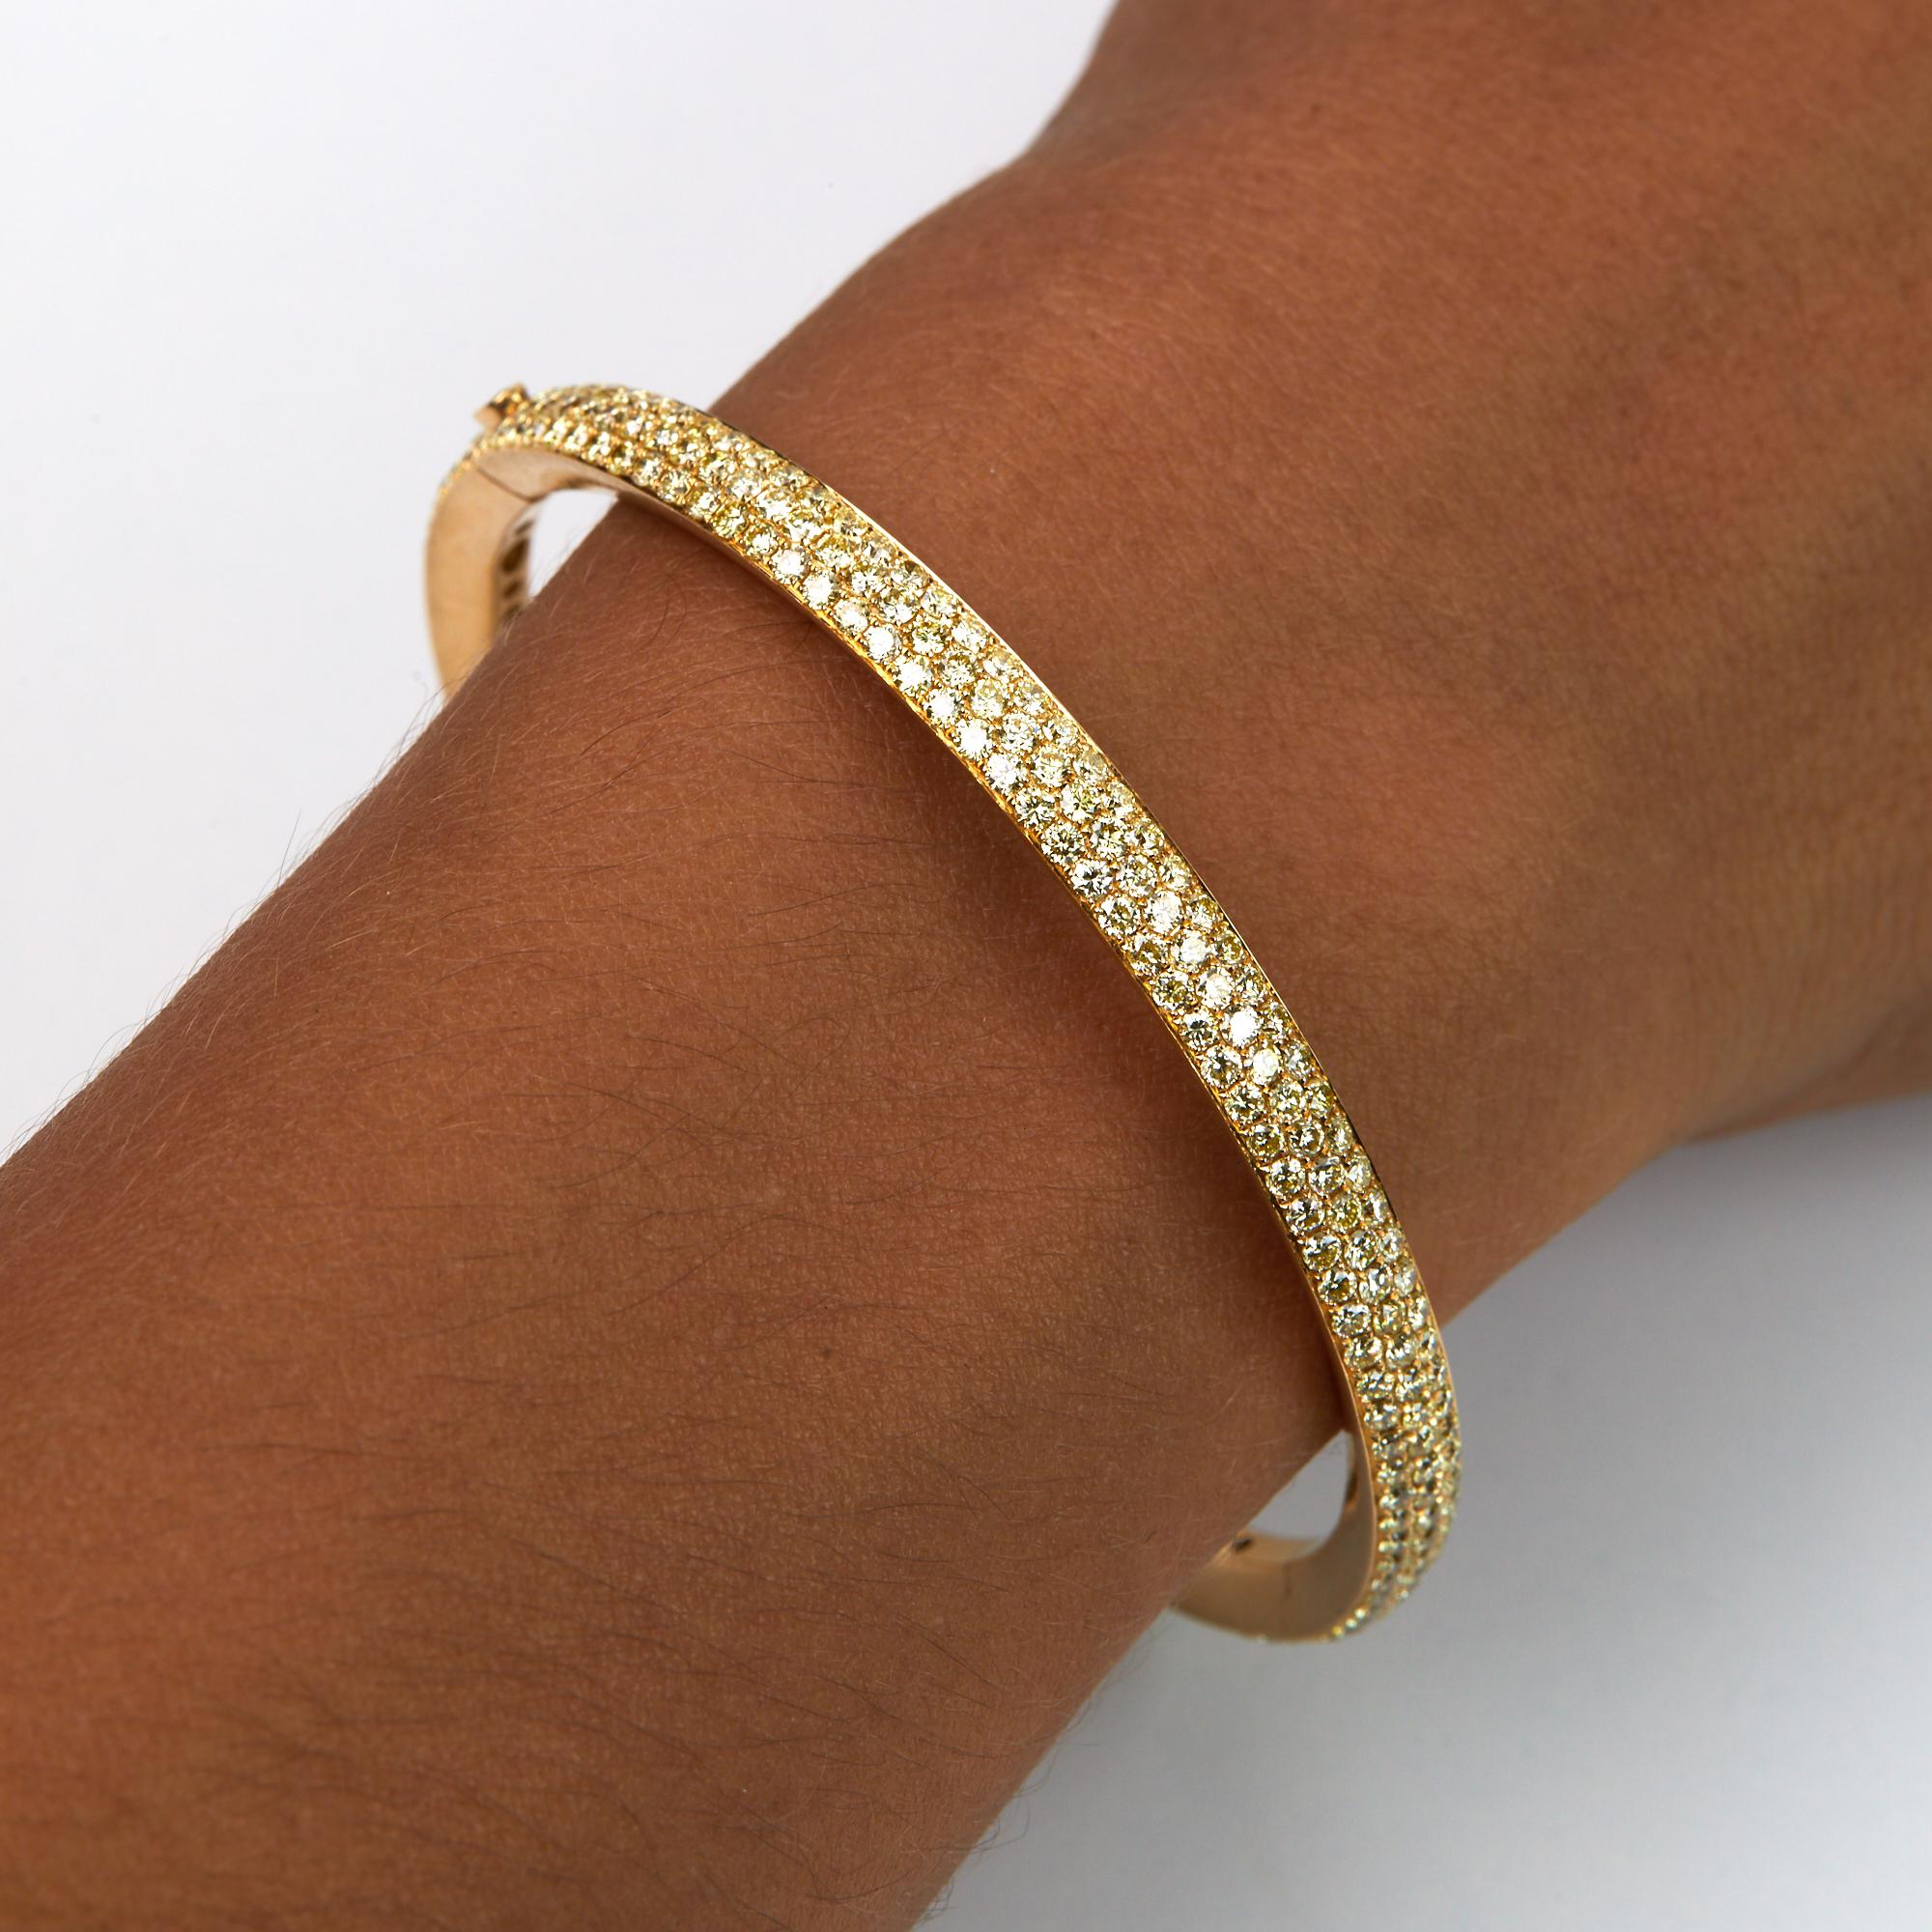 Fancy Yellow Diamond Bracelet with 5.93 carats of diamonds.  302 Brilliant round cut diamonds all individually hand pavé set into 18 karat yellow gold.  Hinged for easy on and off, and a small raised diamond is the clasp to open.  Set in 18 karat